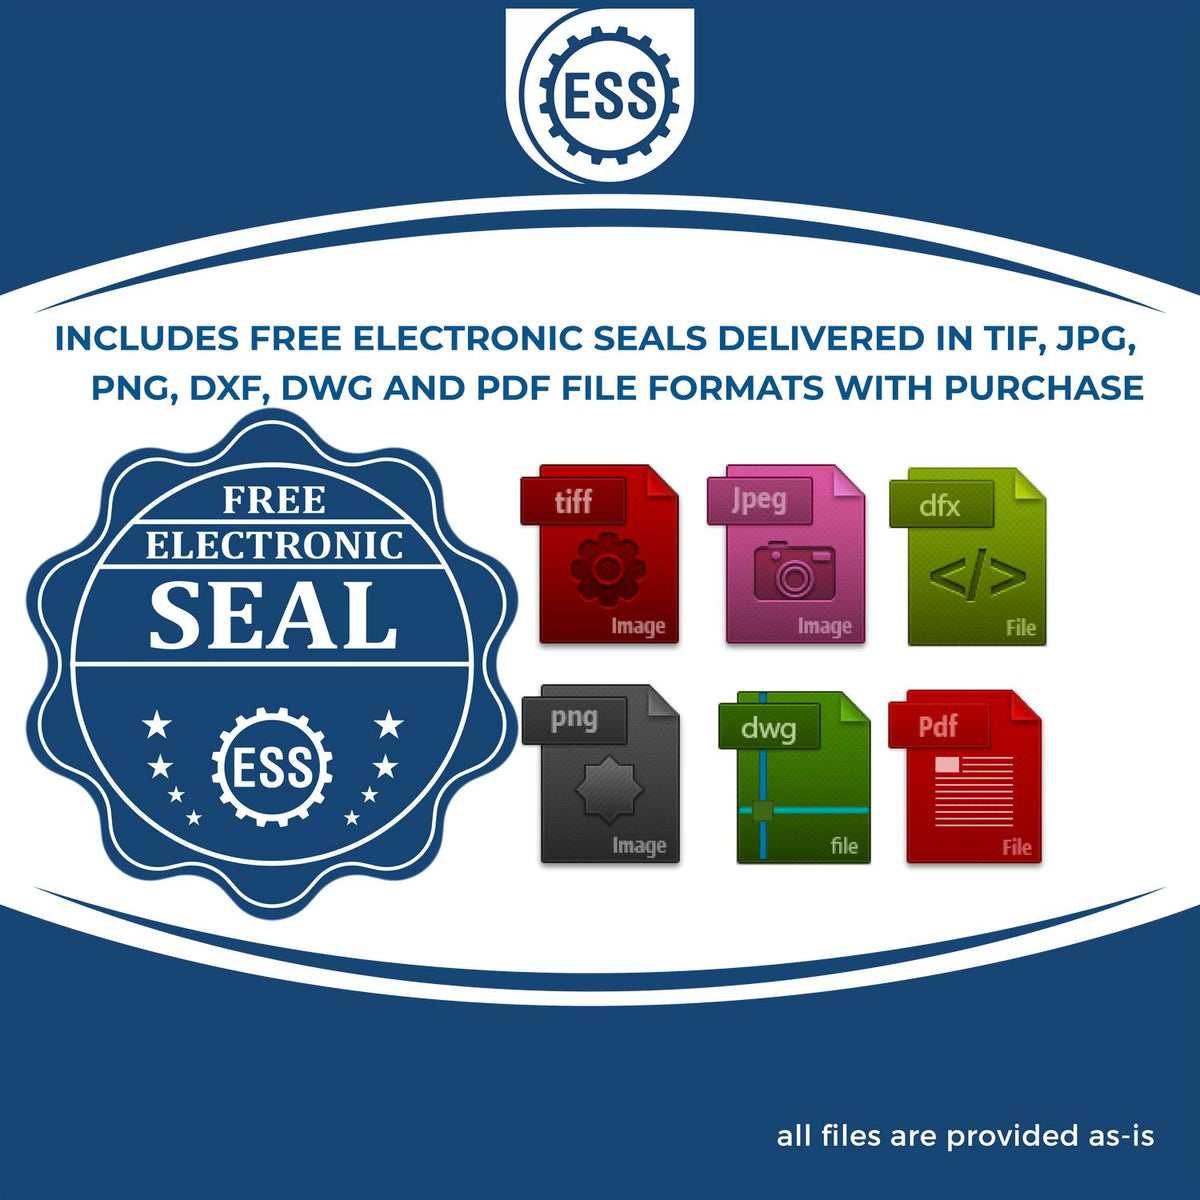 An infographic for the free electronic seal for the Slim Pre-Inked Rhode Island Landscape Architect Seal Stamp illustrating the different file type icons such as DXF, DWG, TIF, JPG and PNG.